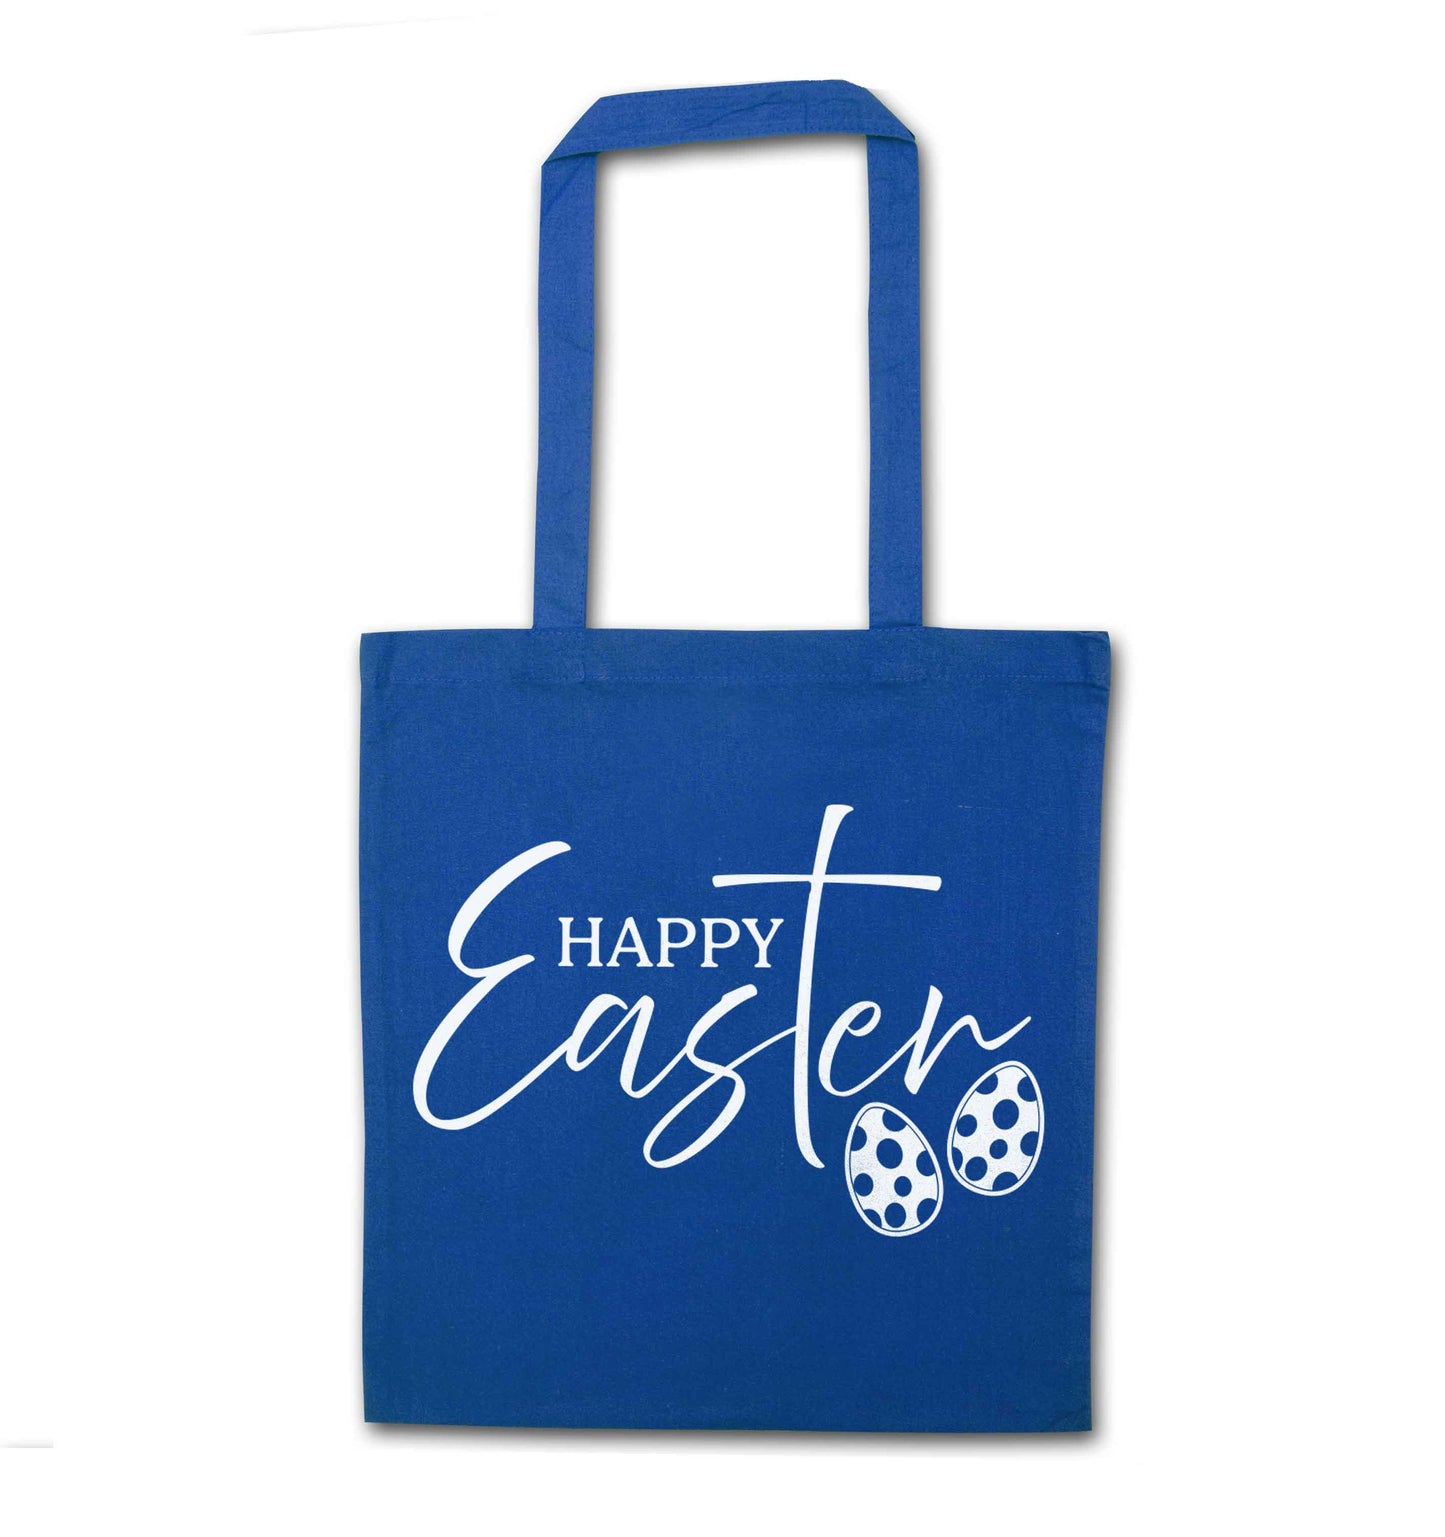 Happy Easter blue tote bag